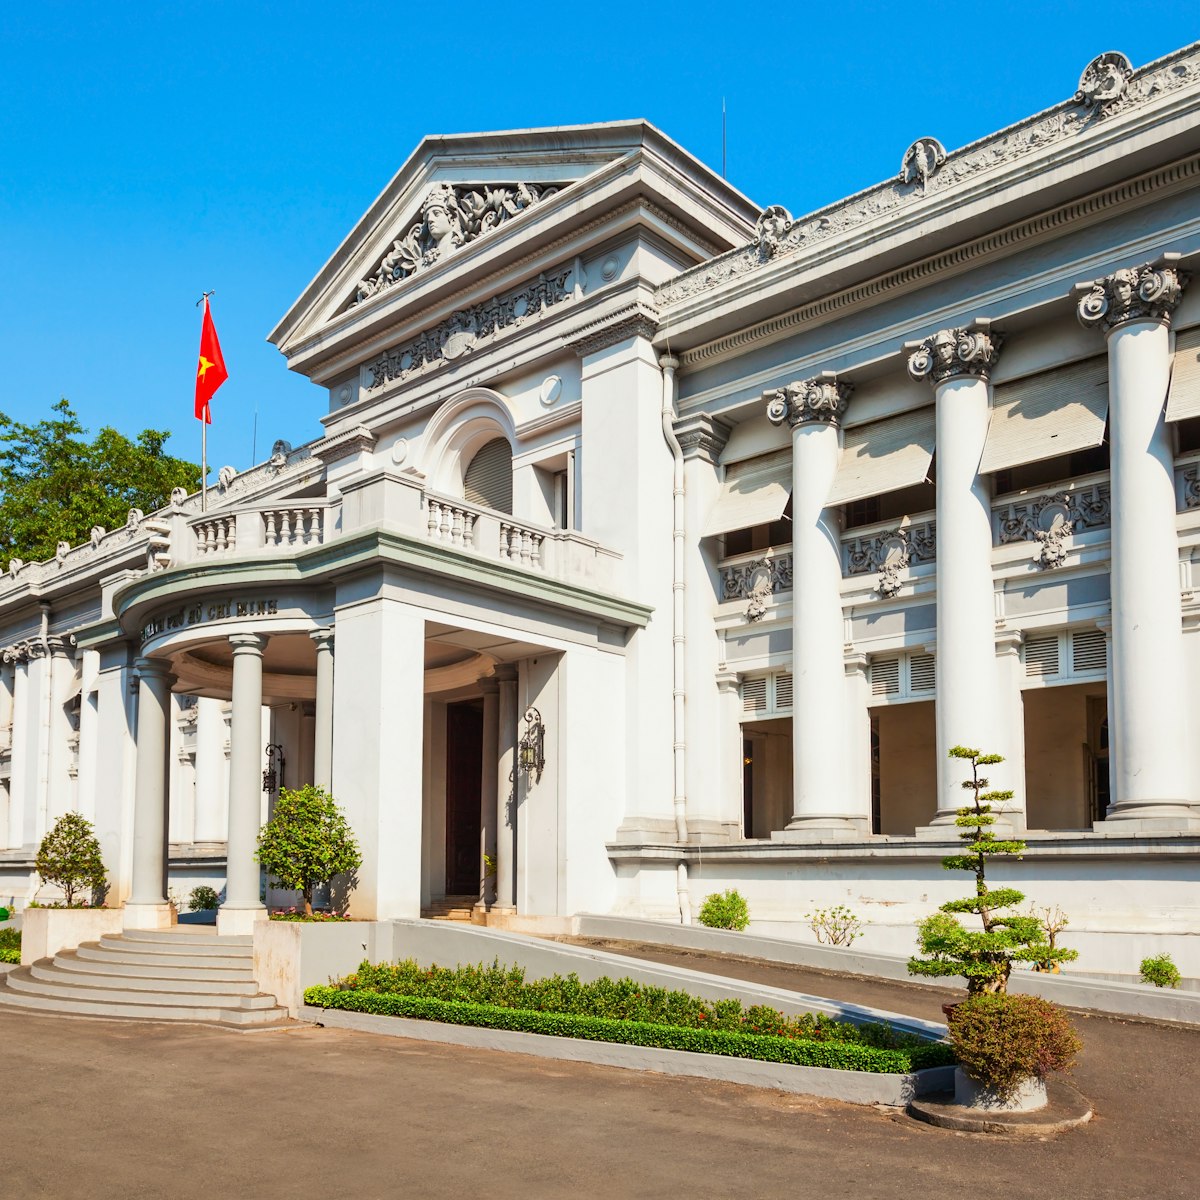 Ho Chi Minh City Museum or Bao Tang Thanh Pho is a historical site and museum in Ho Chi Minh City or Saigon in Vietnam
1138819423
chi, ho, minh, thanh